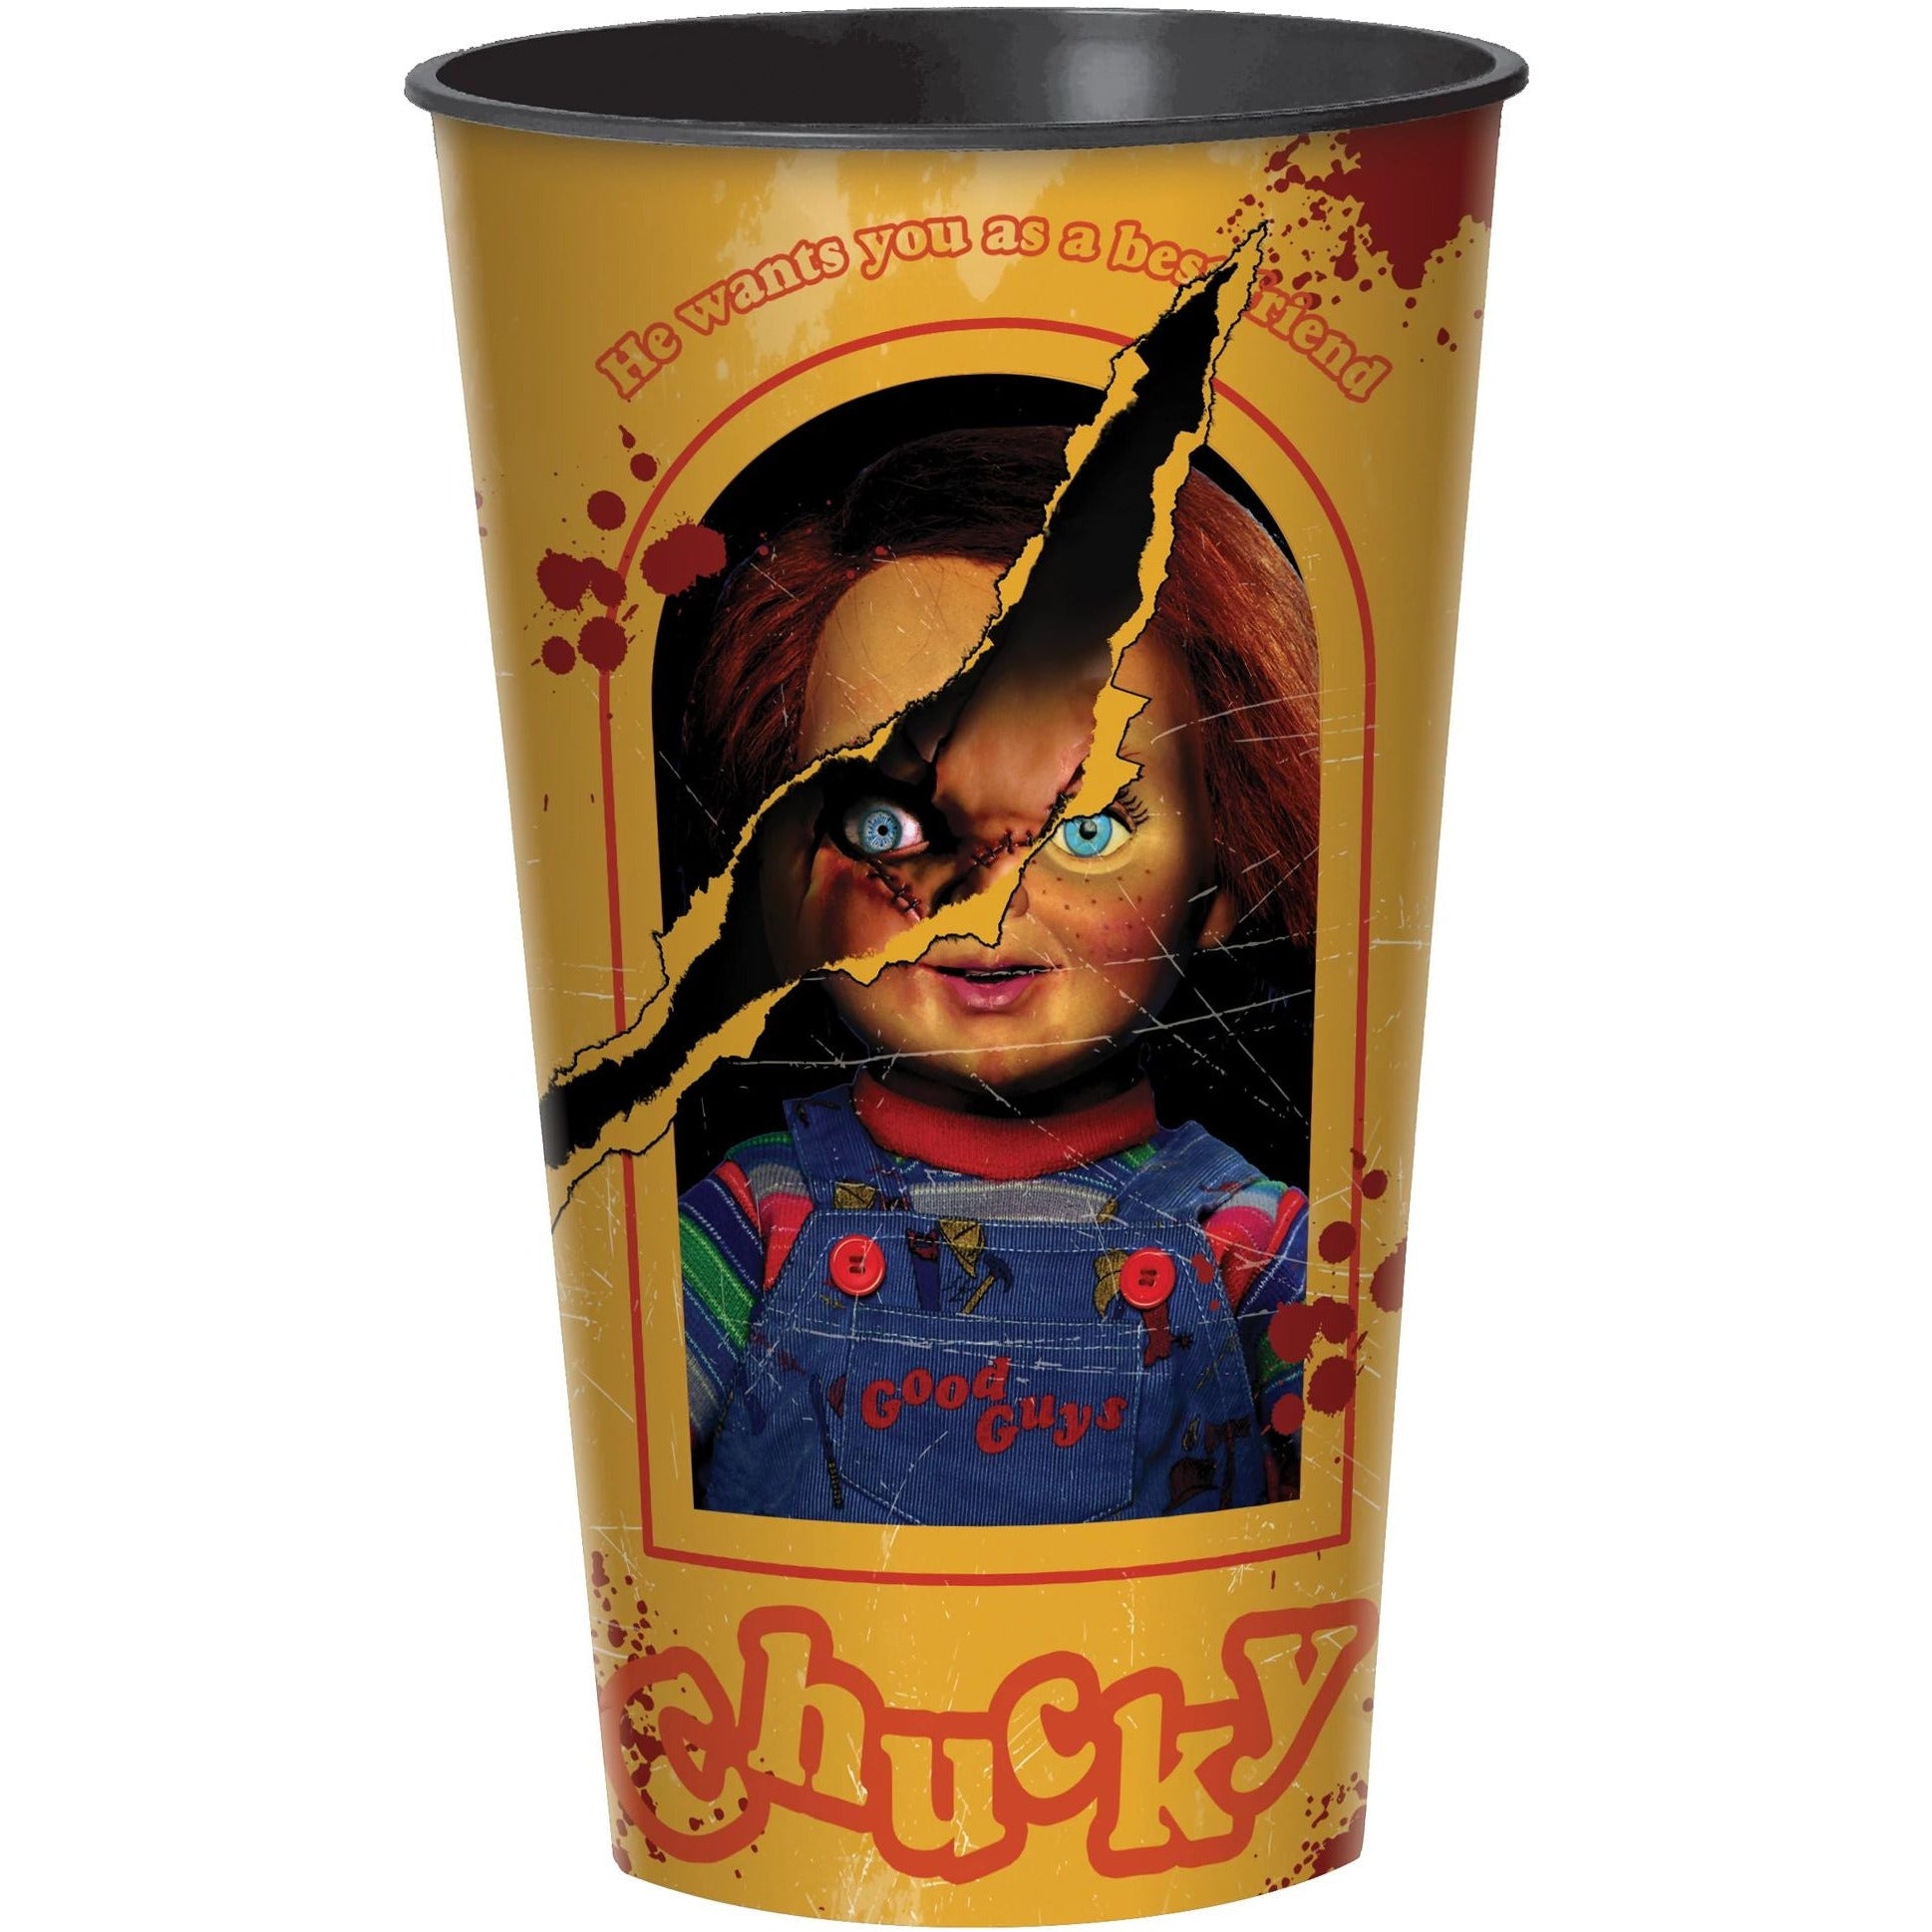 Amscan HOLIDAY: HALLOWEEN Child's Play Chucky Plastic Cup, 32 oz.